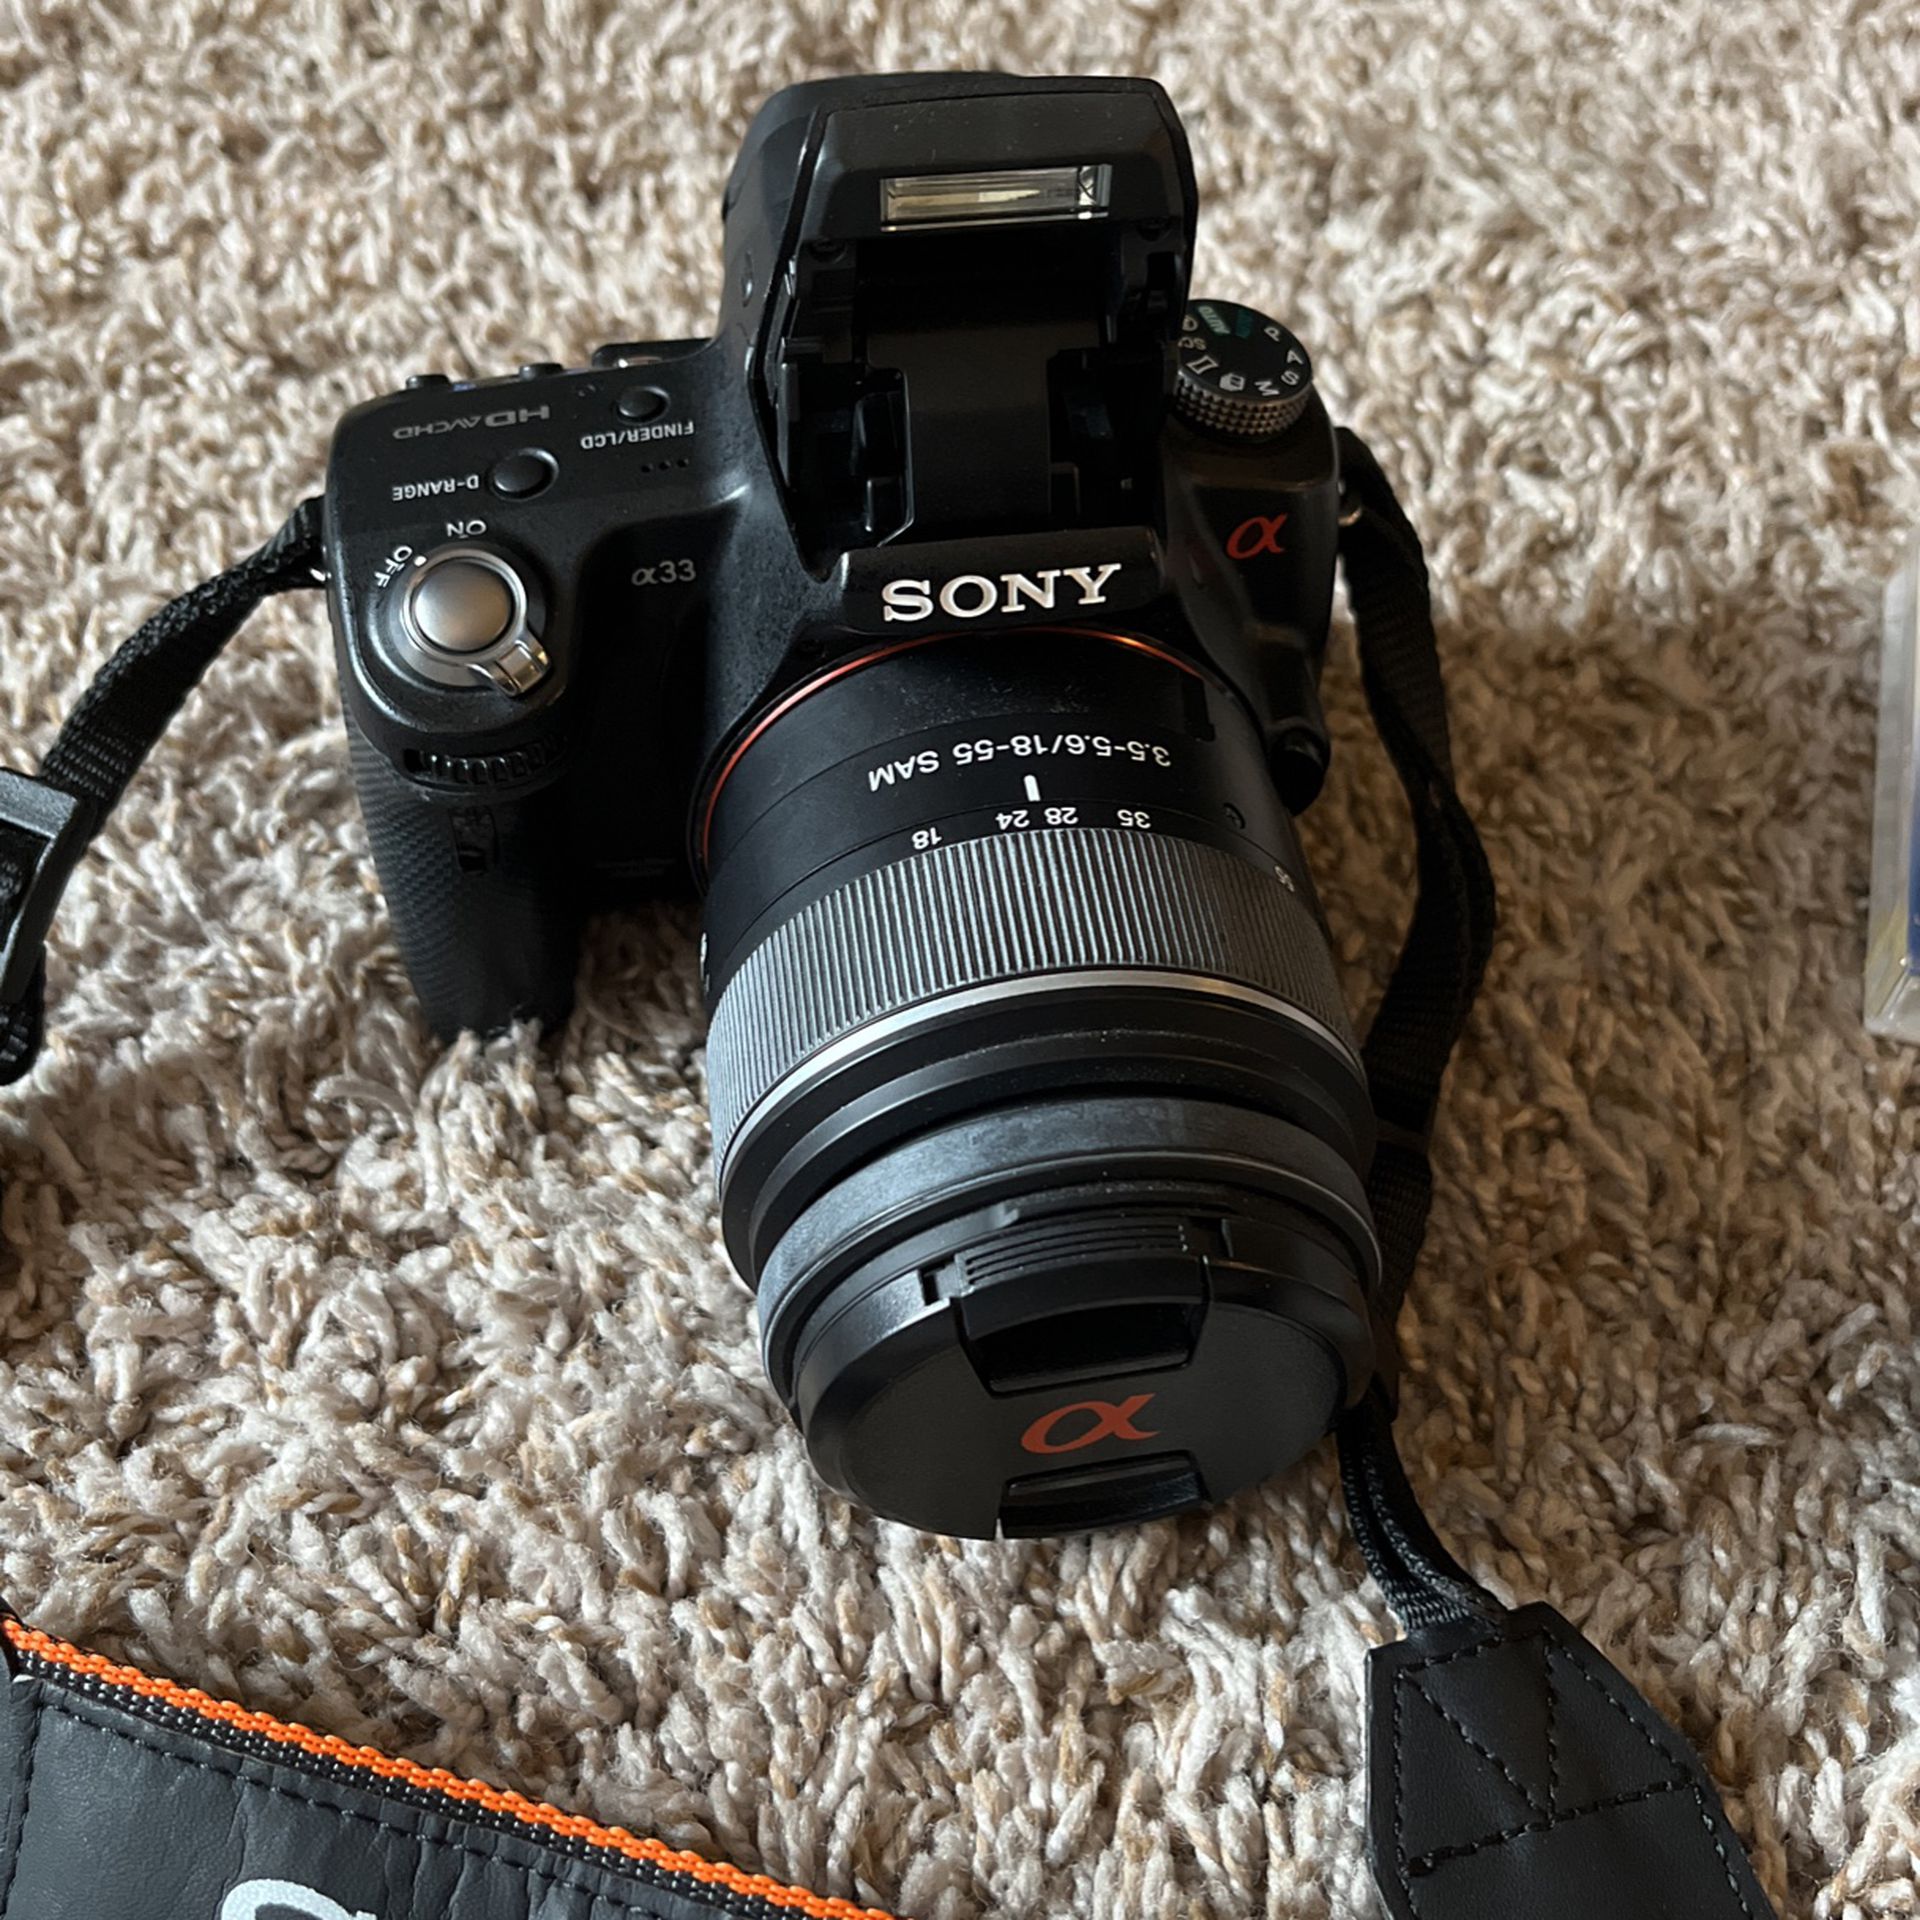 whisky Forma del barco lavar Sony a33 Camera for Sale in Beaverton, OR - OfferUp